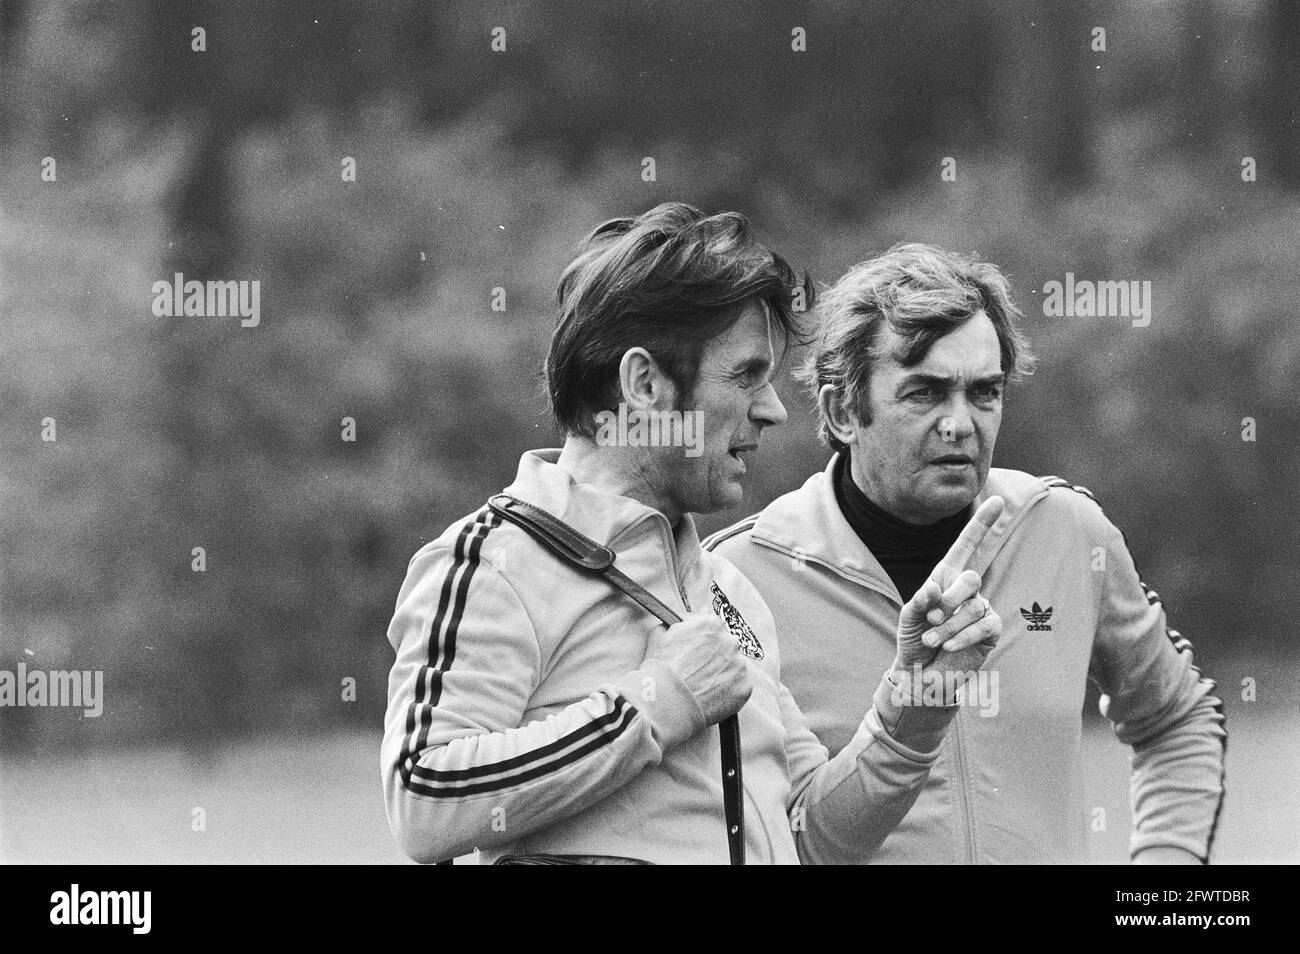 Practice match Dutch national team against Xerxes; no. 14 trainers Zwartkruis (l) and Happel, no. 15 Hugo Hovenkamp center with ball, with knee ligament, May 23, 1978, sports, soccer, The Netherlands, 20th century press agency photo, news to remember, documentary, historic photography 1945-1990, visual stories, human history of the Twentieth Century, capturing moments in time Stock Photo